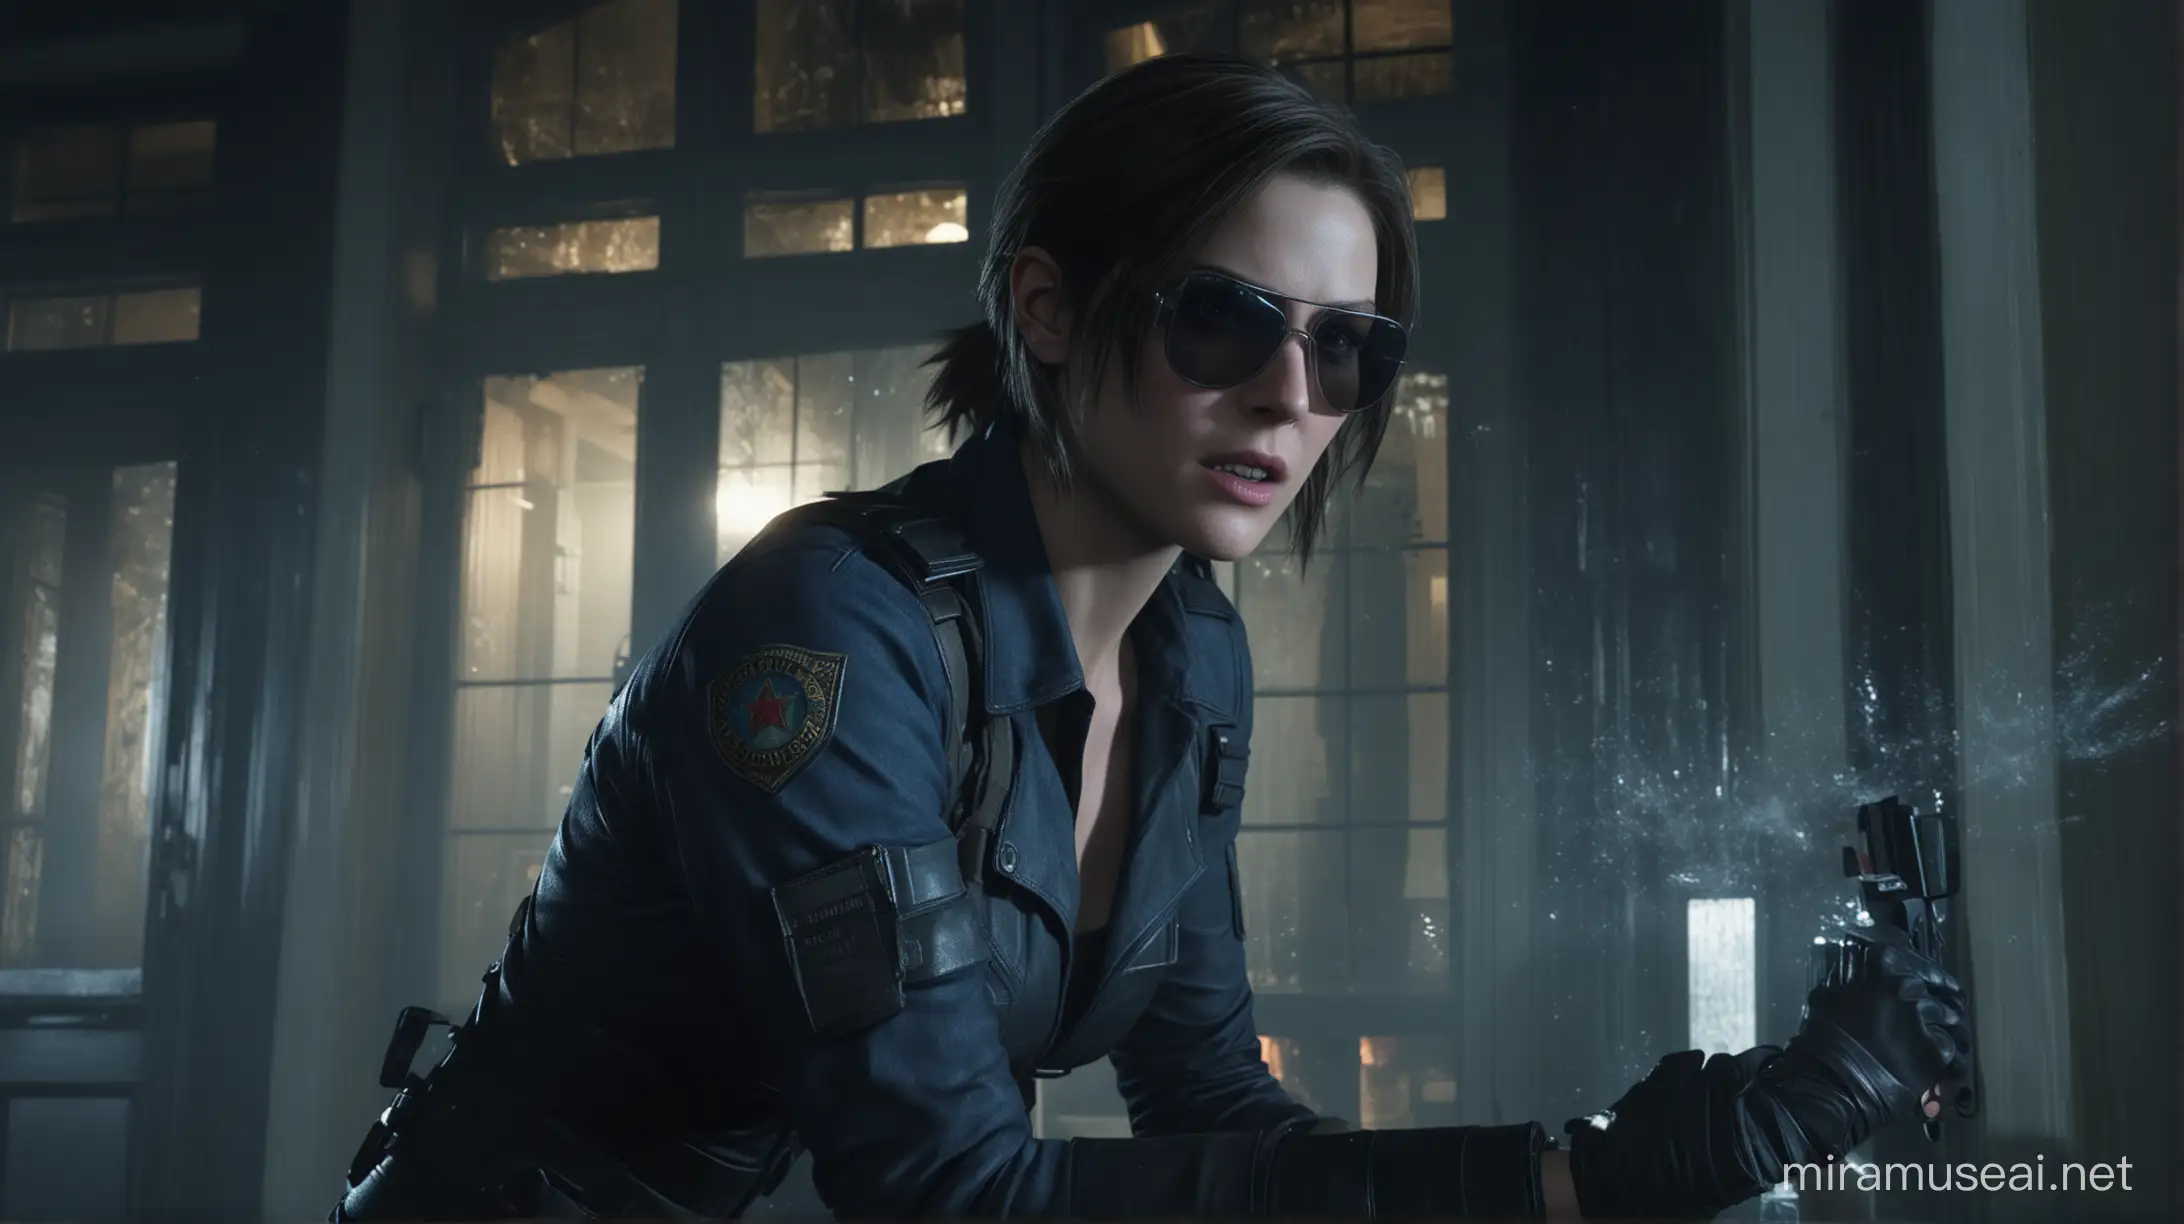 cinematic still, resident evil, jill valentine pushing man with sunglasses through a window, mansion exterior, smashed glass, night, fog